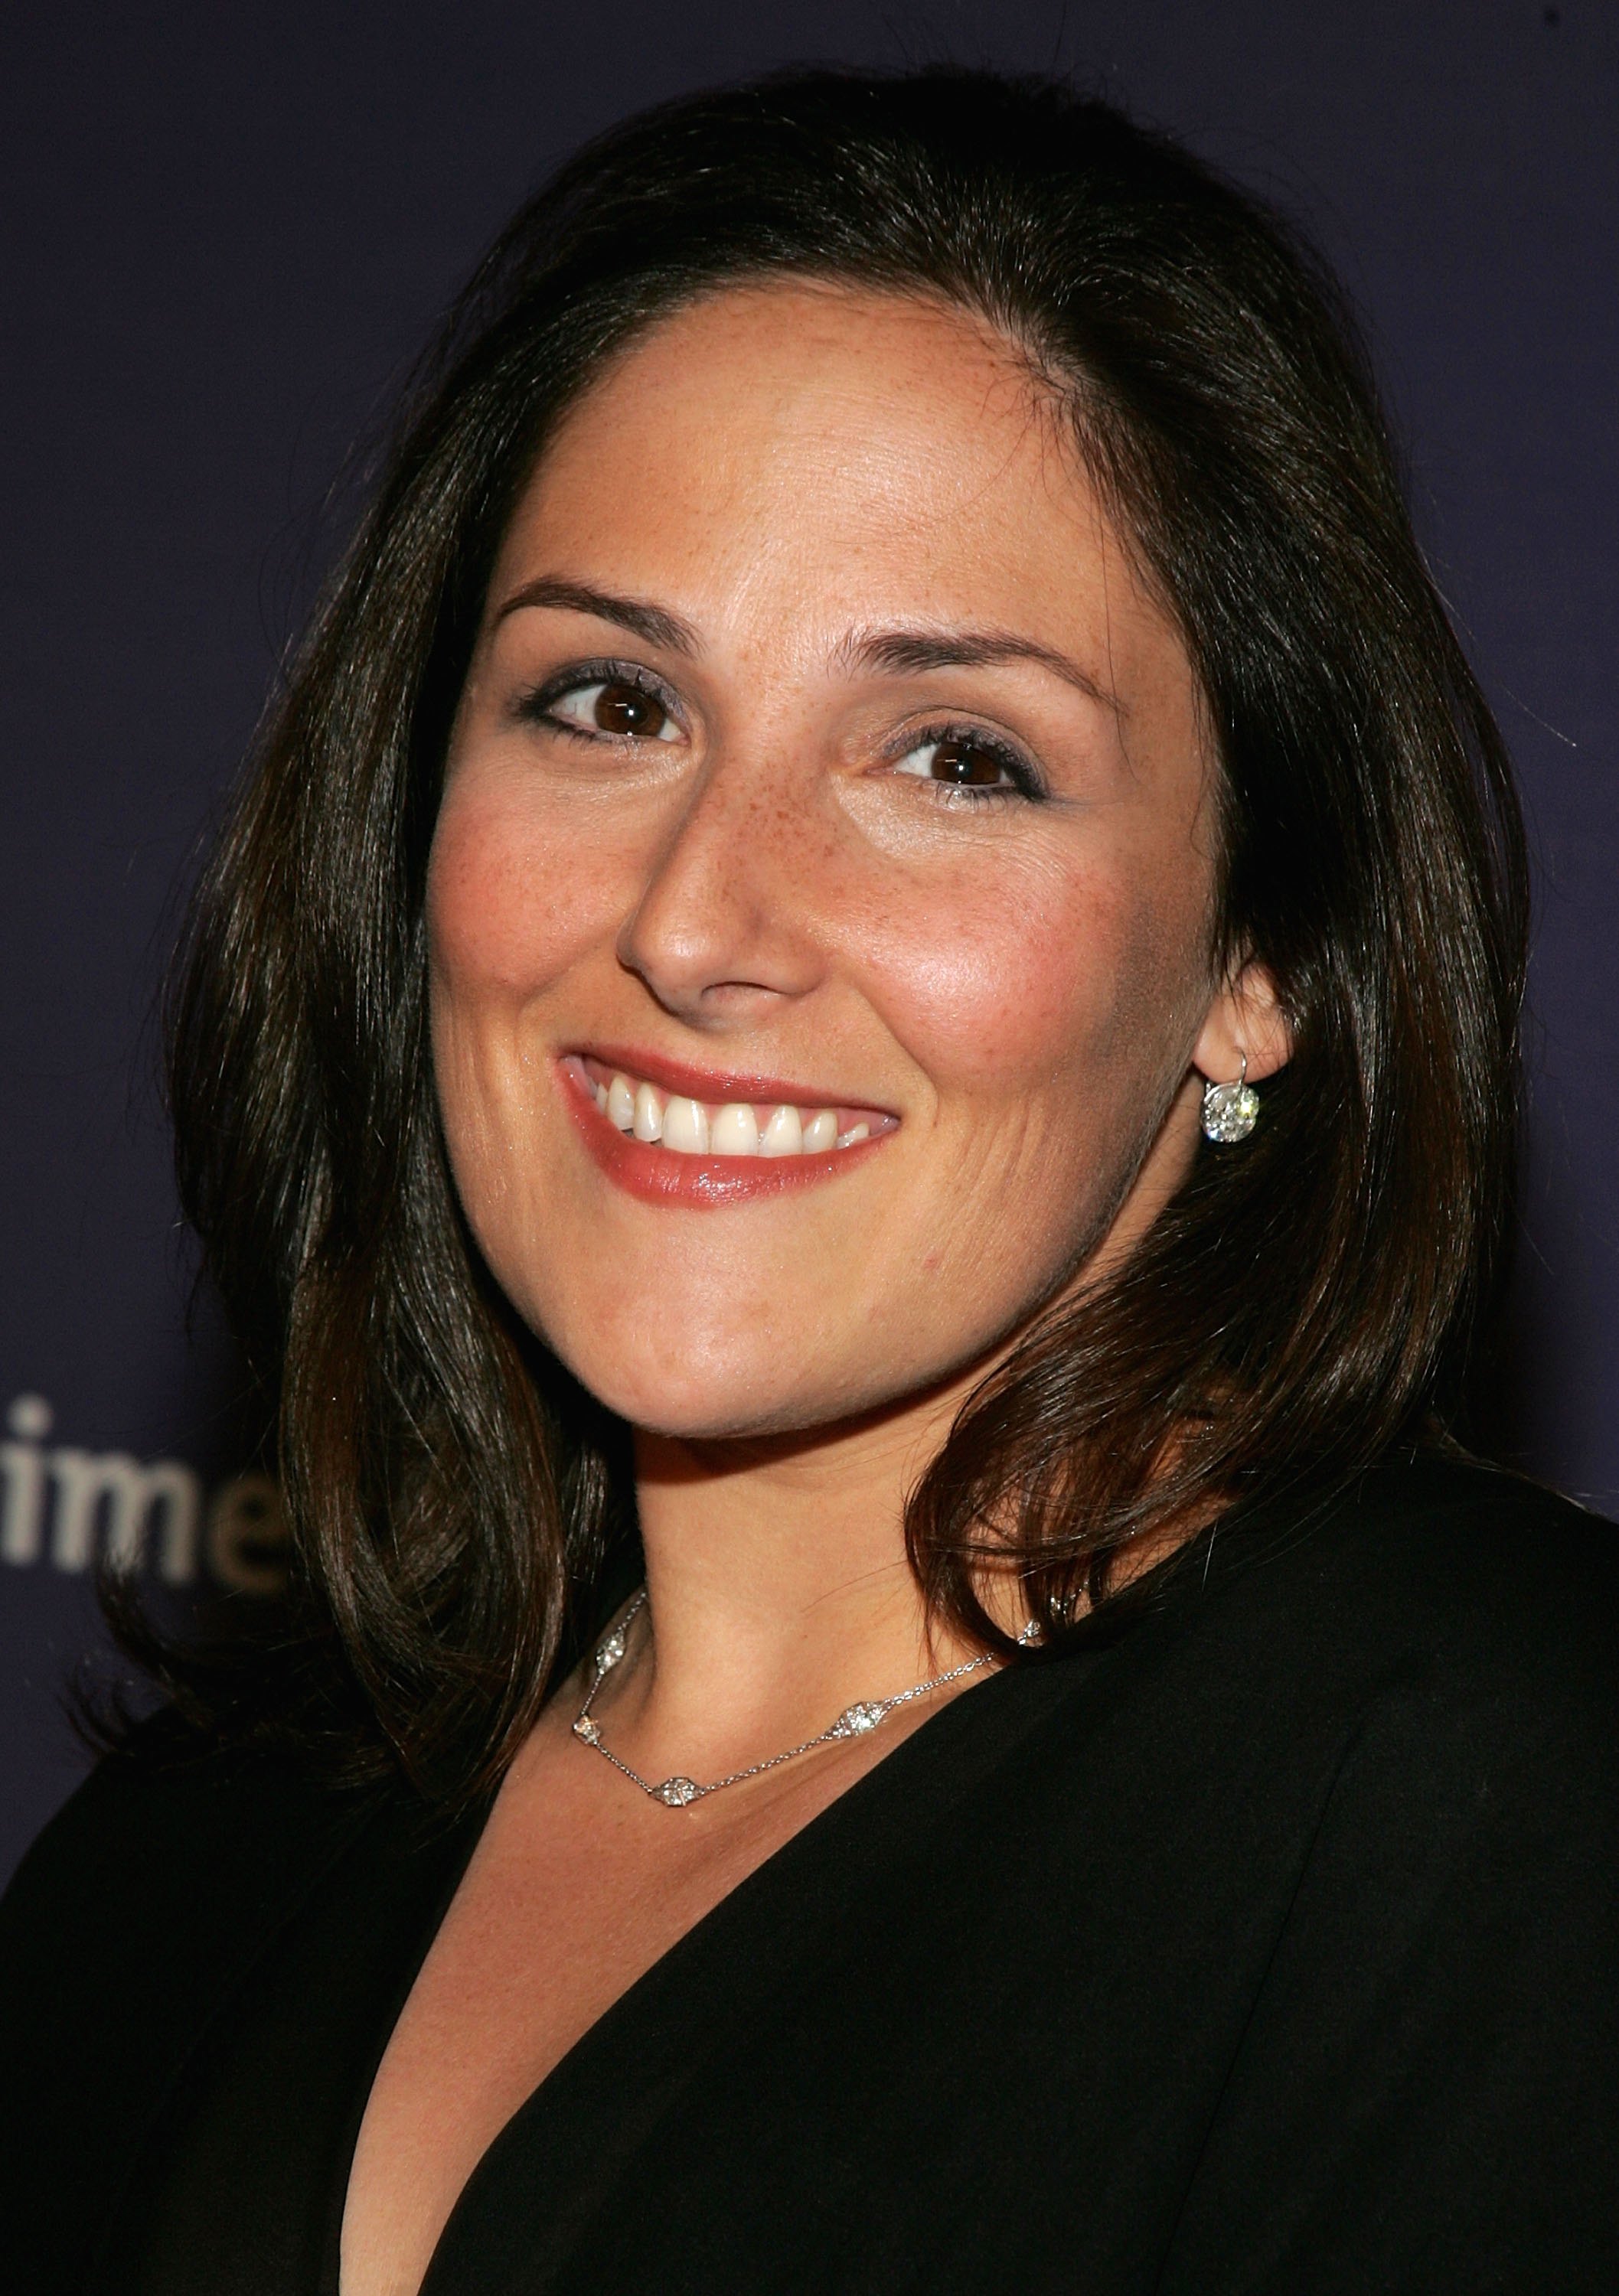 Ricki Lake attends the Alzheimers Associations 14th annual "A Night at Sardis" in Beverly Hills, California, on March 8, 2006. | Source: Getty Images